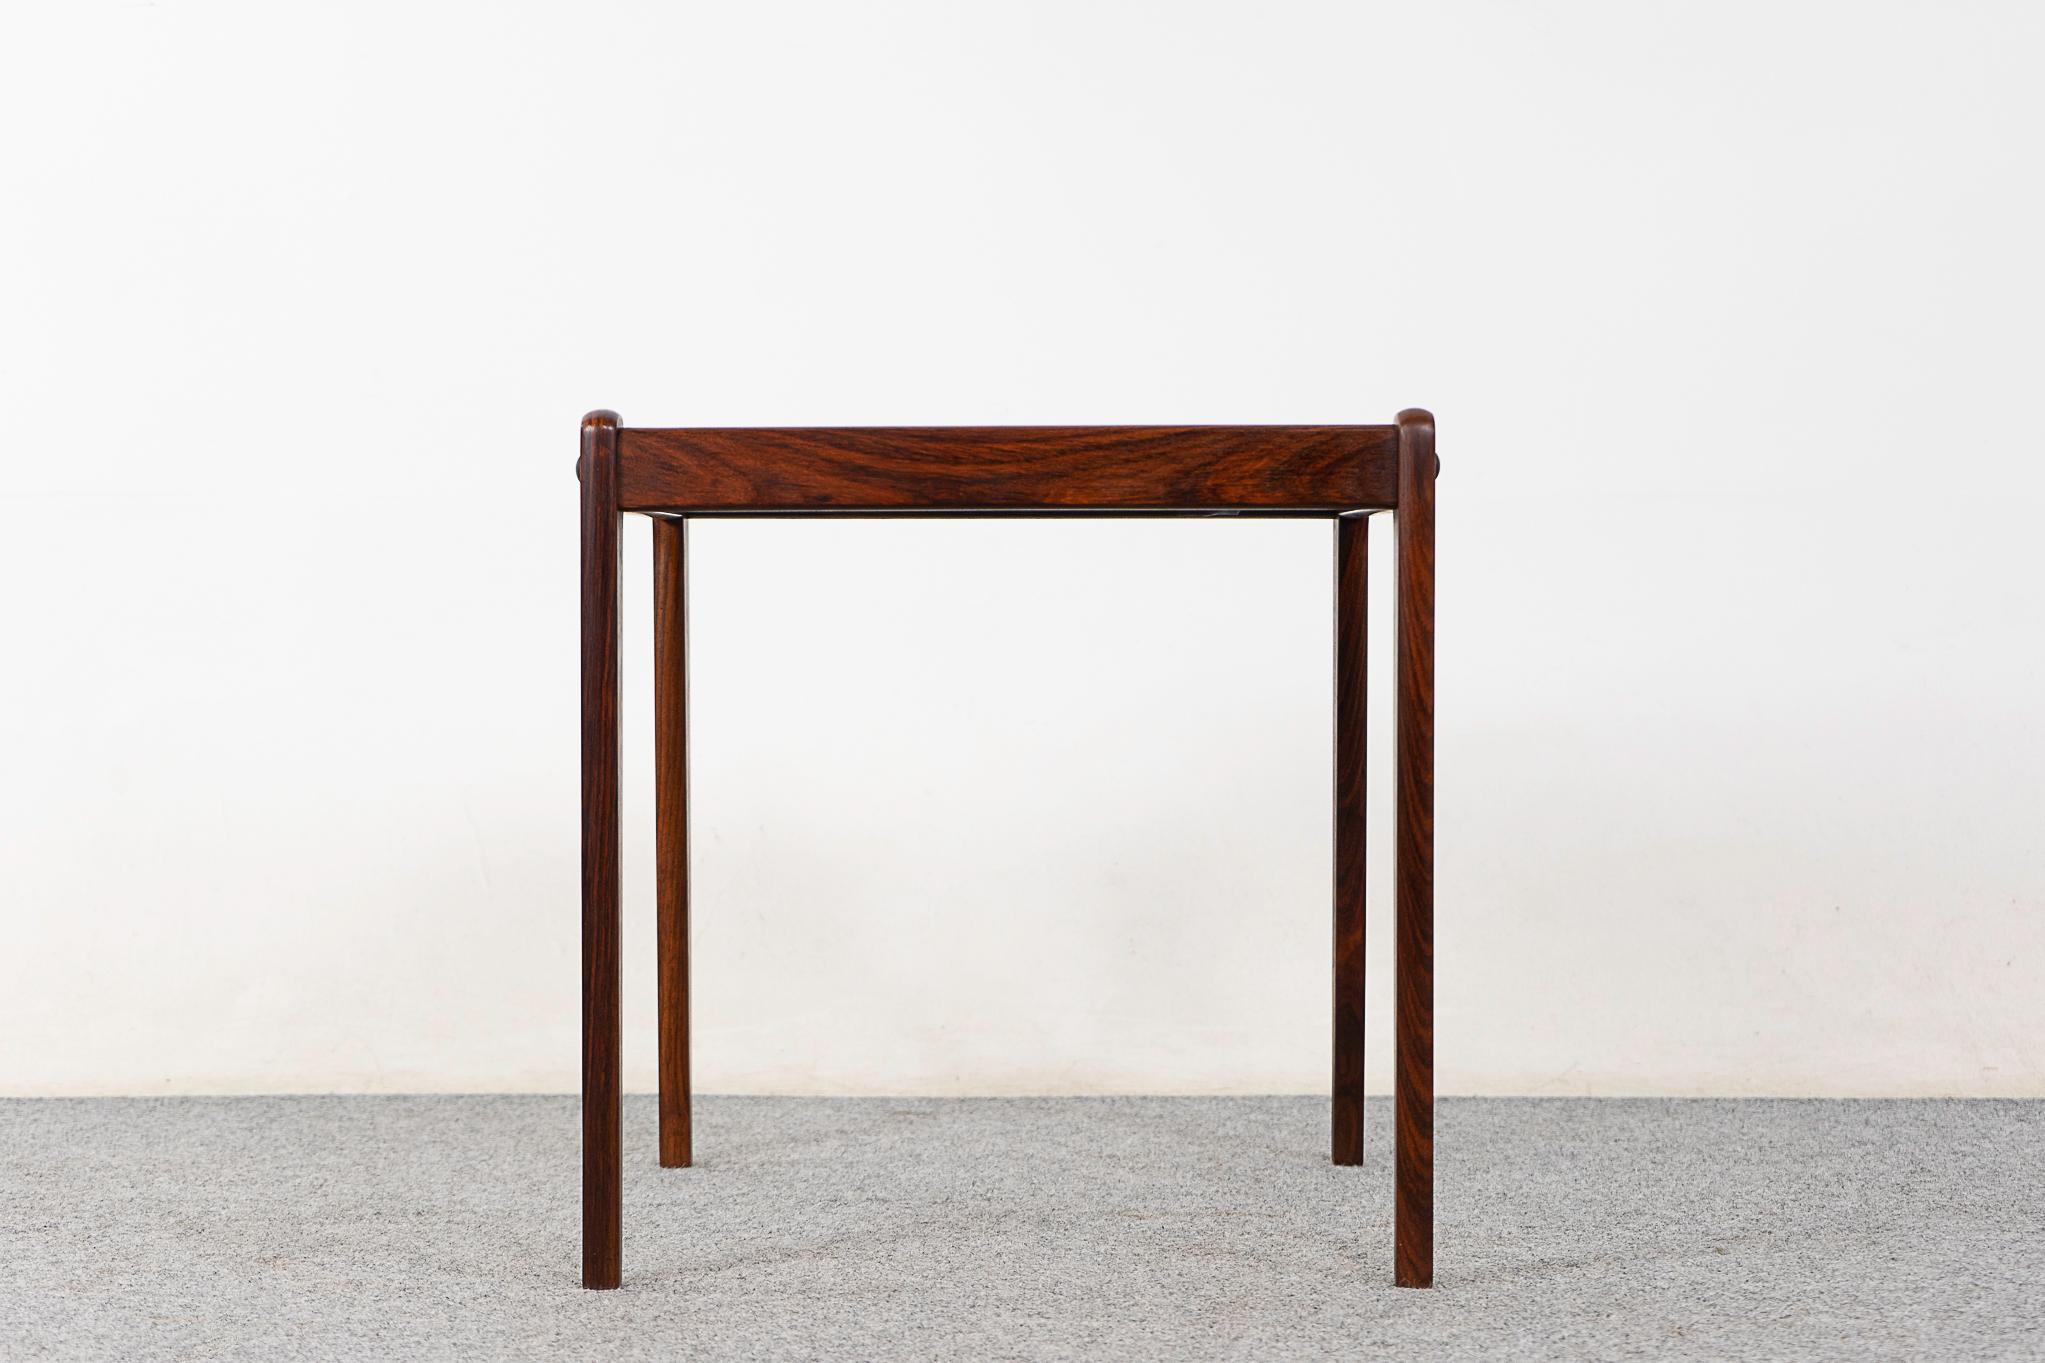 Rosewood mid-century side table by Spottrup, circa 1960's. Solid wood construction on the base and handsome book-matched veneer on the top. Use as a bedside, or end table! 

Unrestored item, some marks consistent with age.